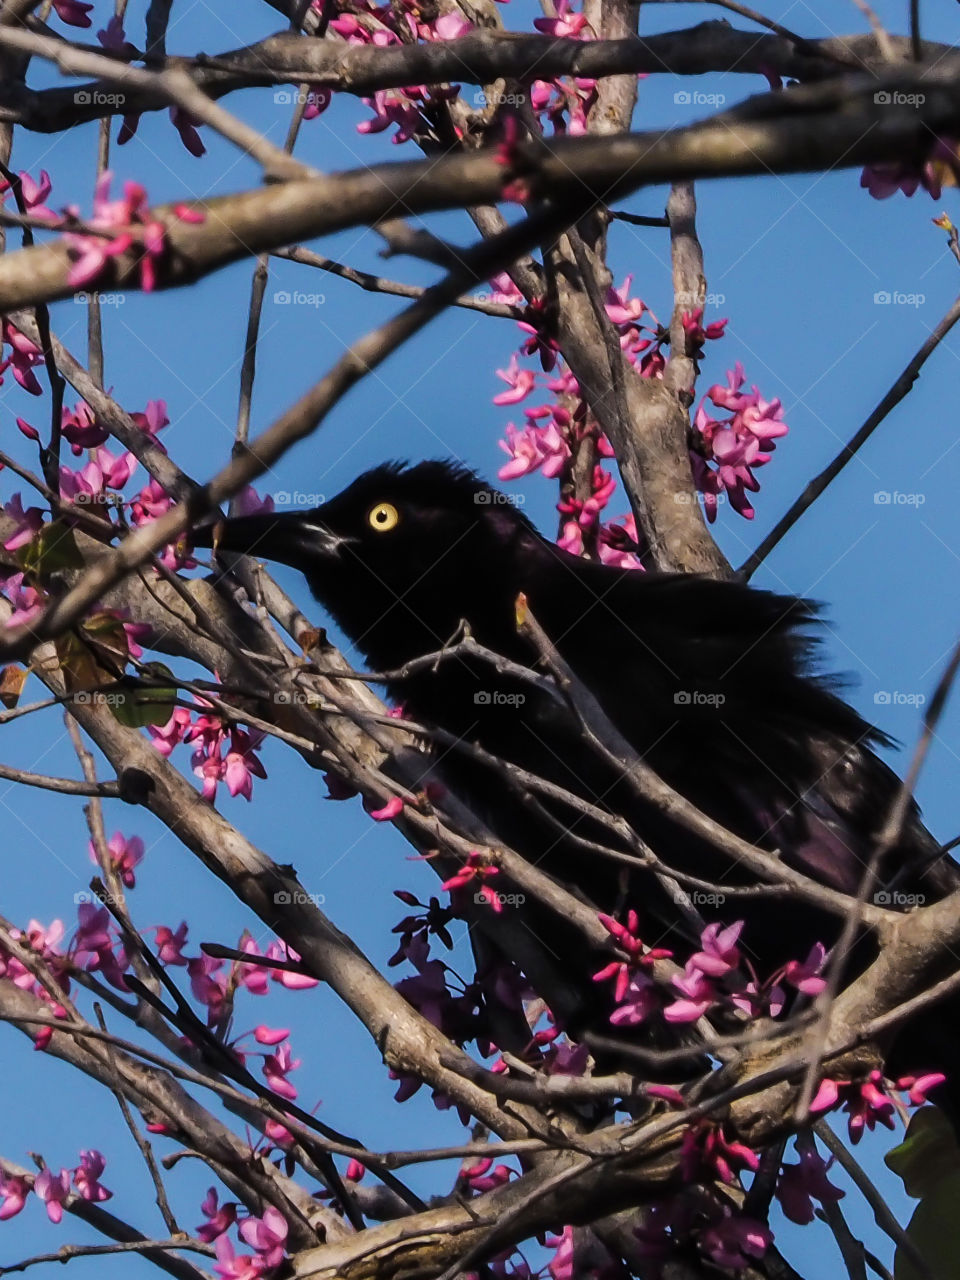 Common Grackle contrasting against pink flowers and sky